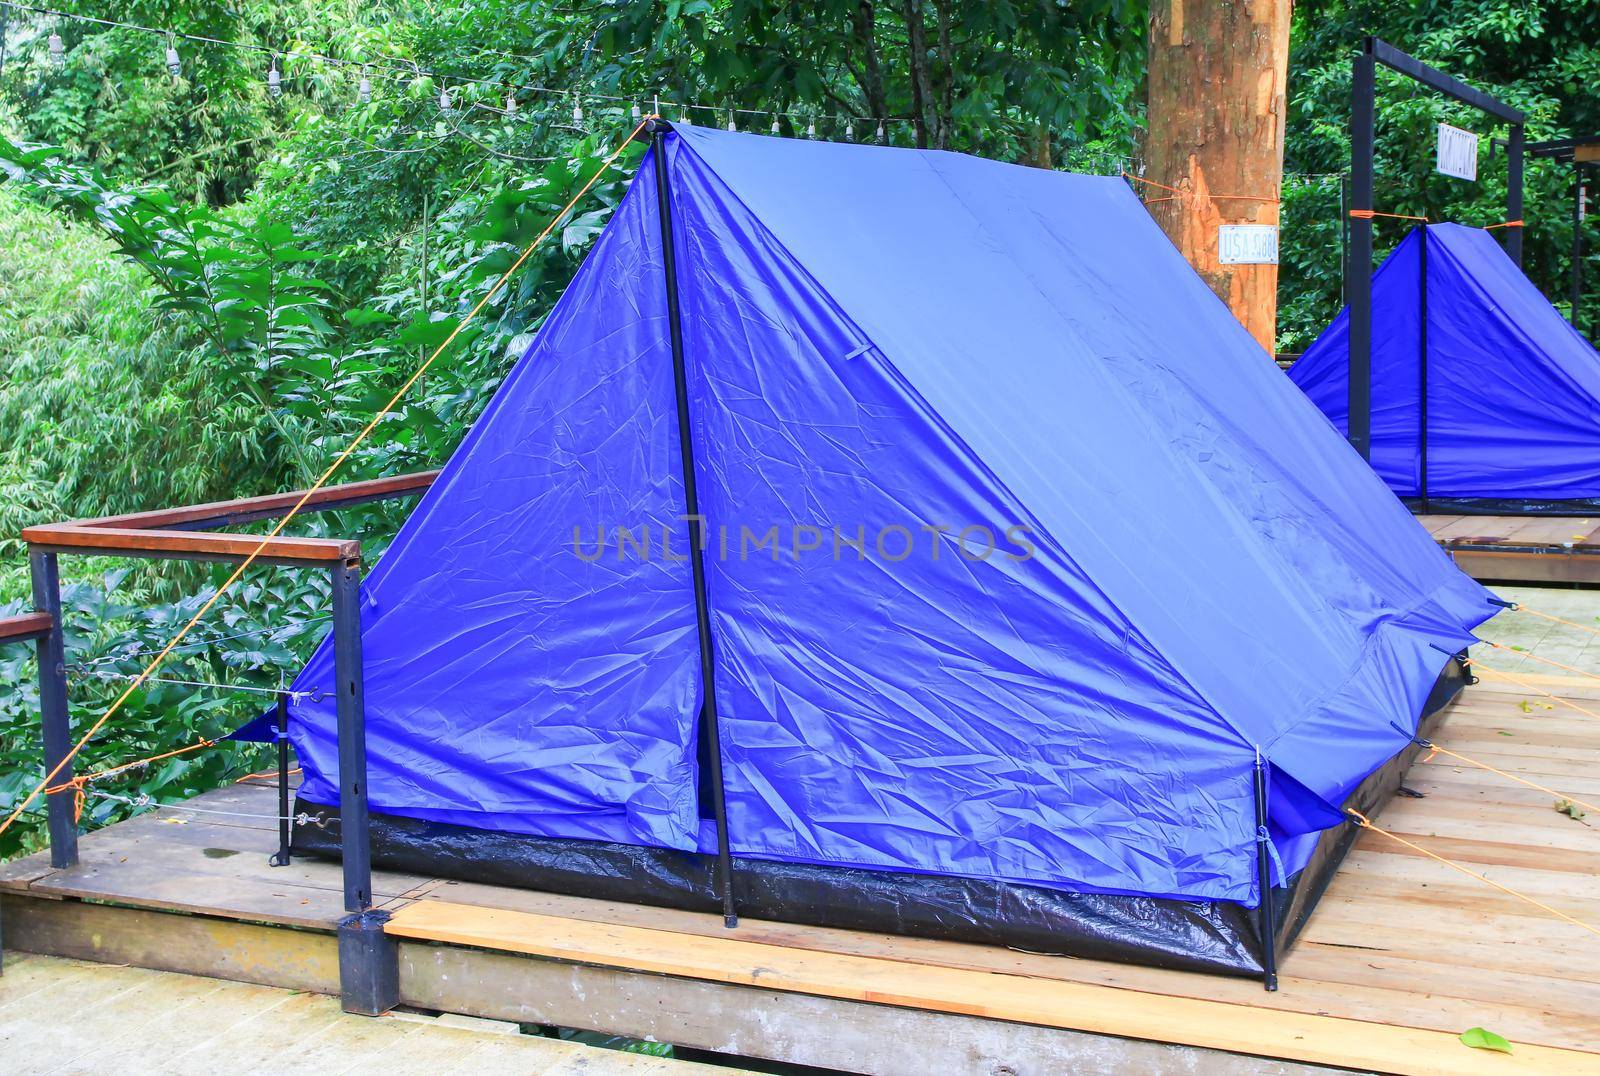 close up tent blue accommodation camping relax in forest